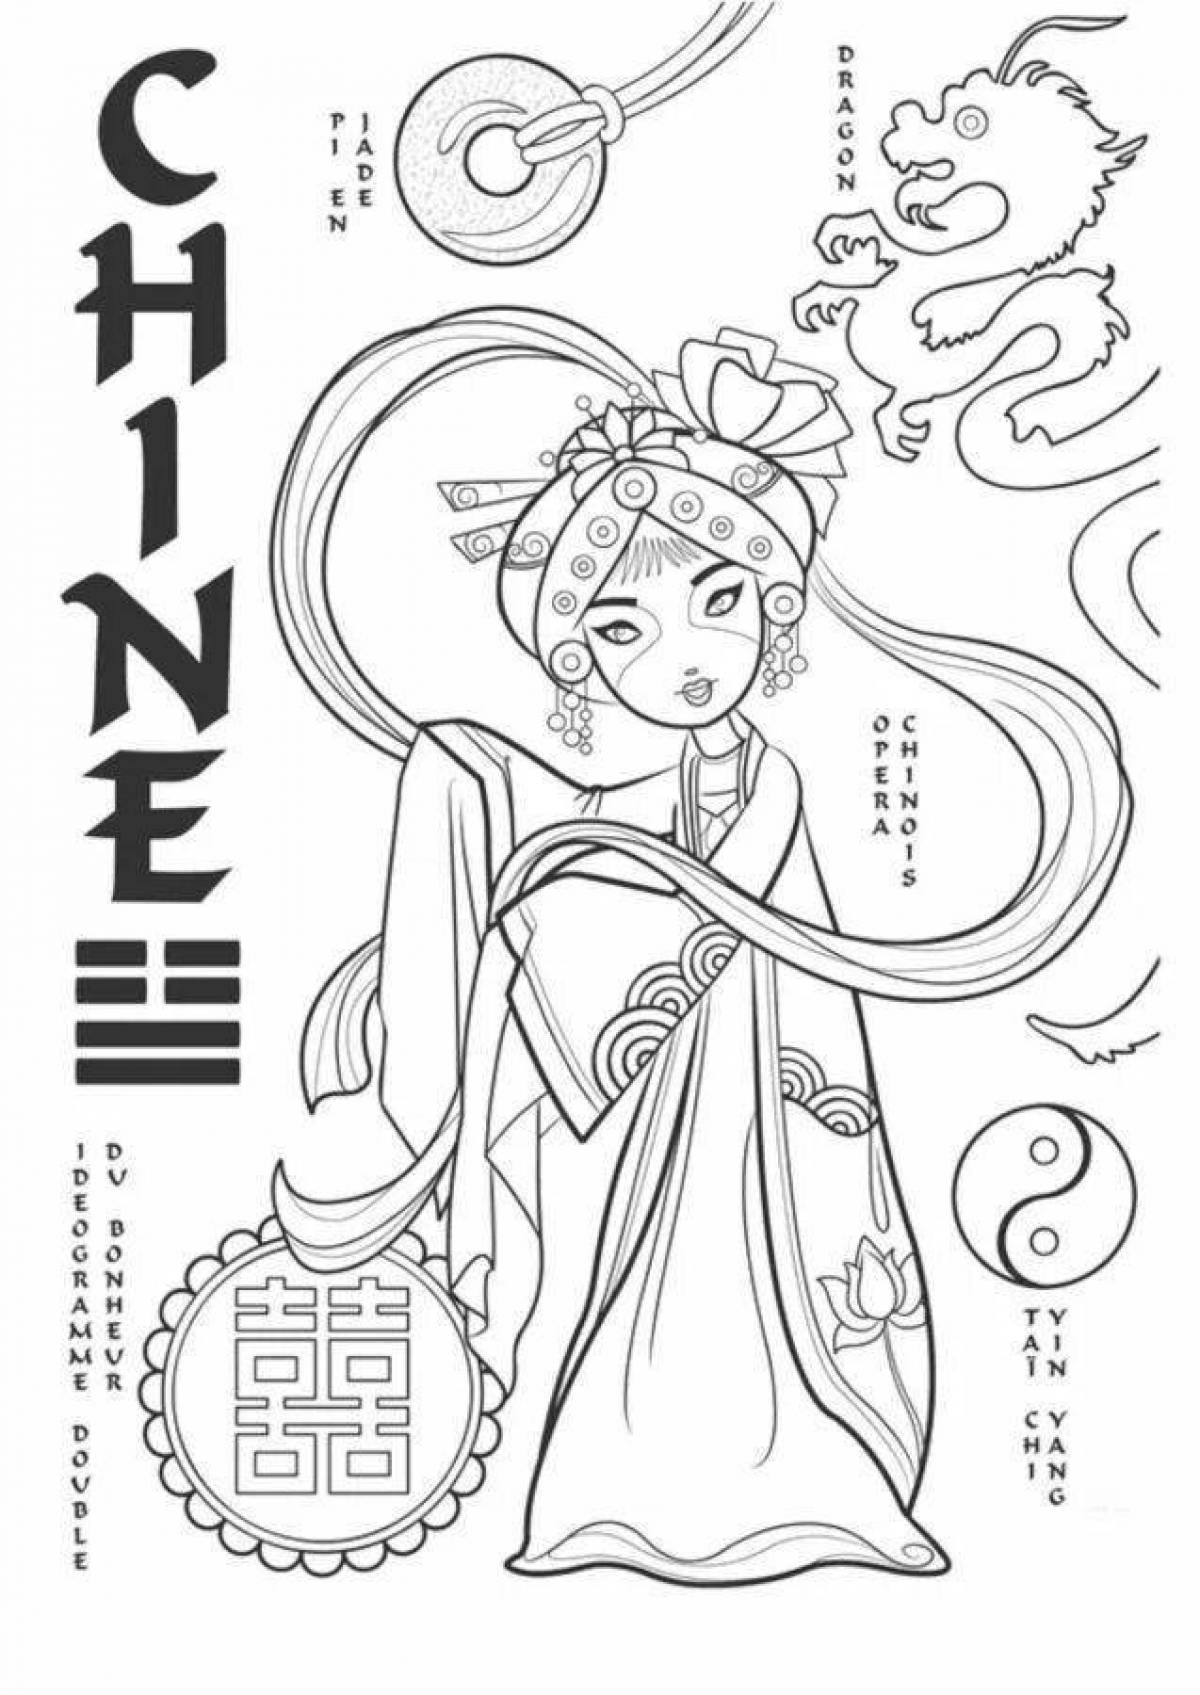 Fancy Chinese coloring book